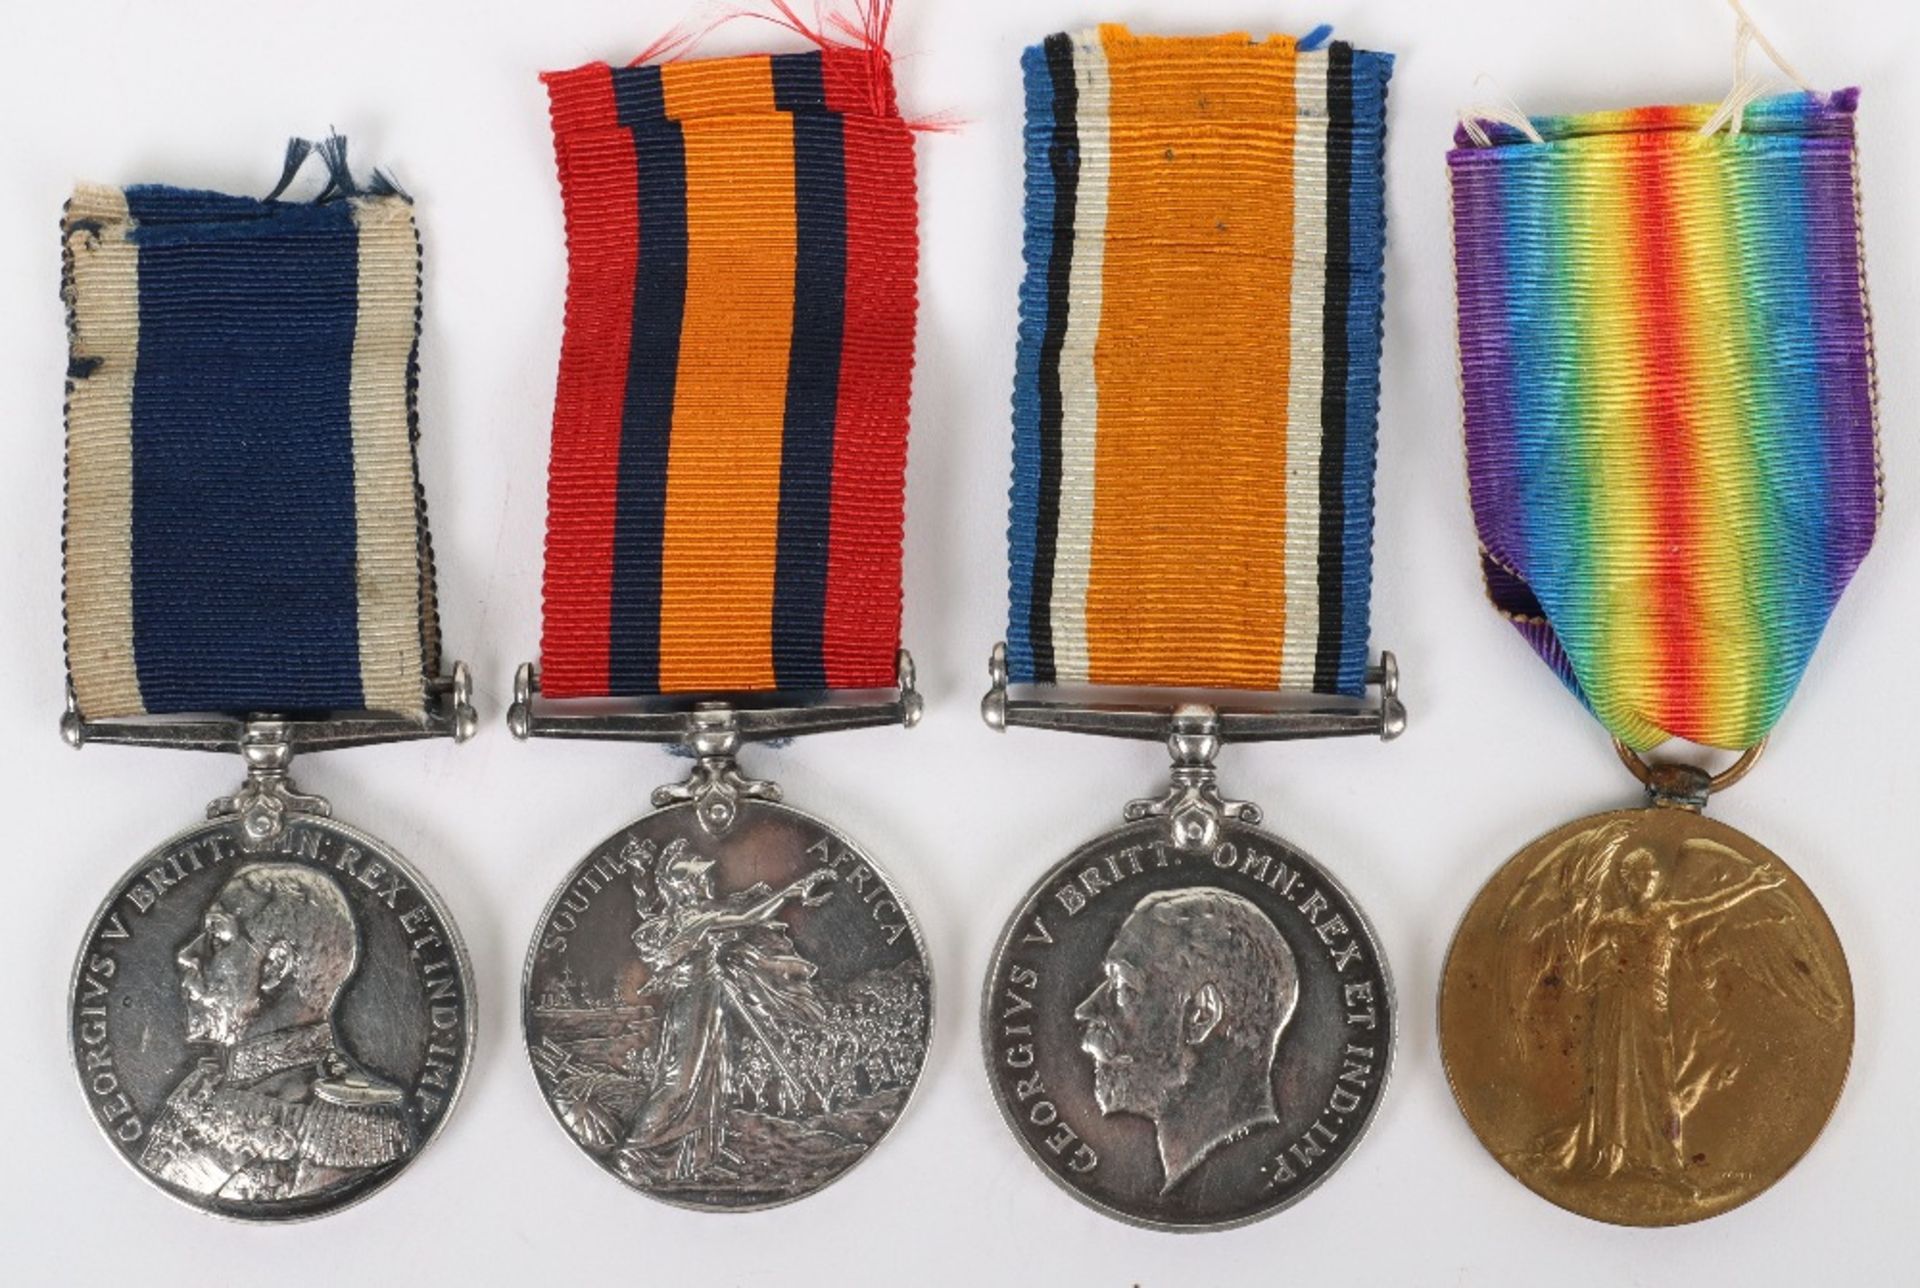 Royal Navy Long Service Medal Group of Four Covering Service from the Boer War to the First World Wa